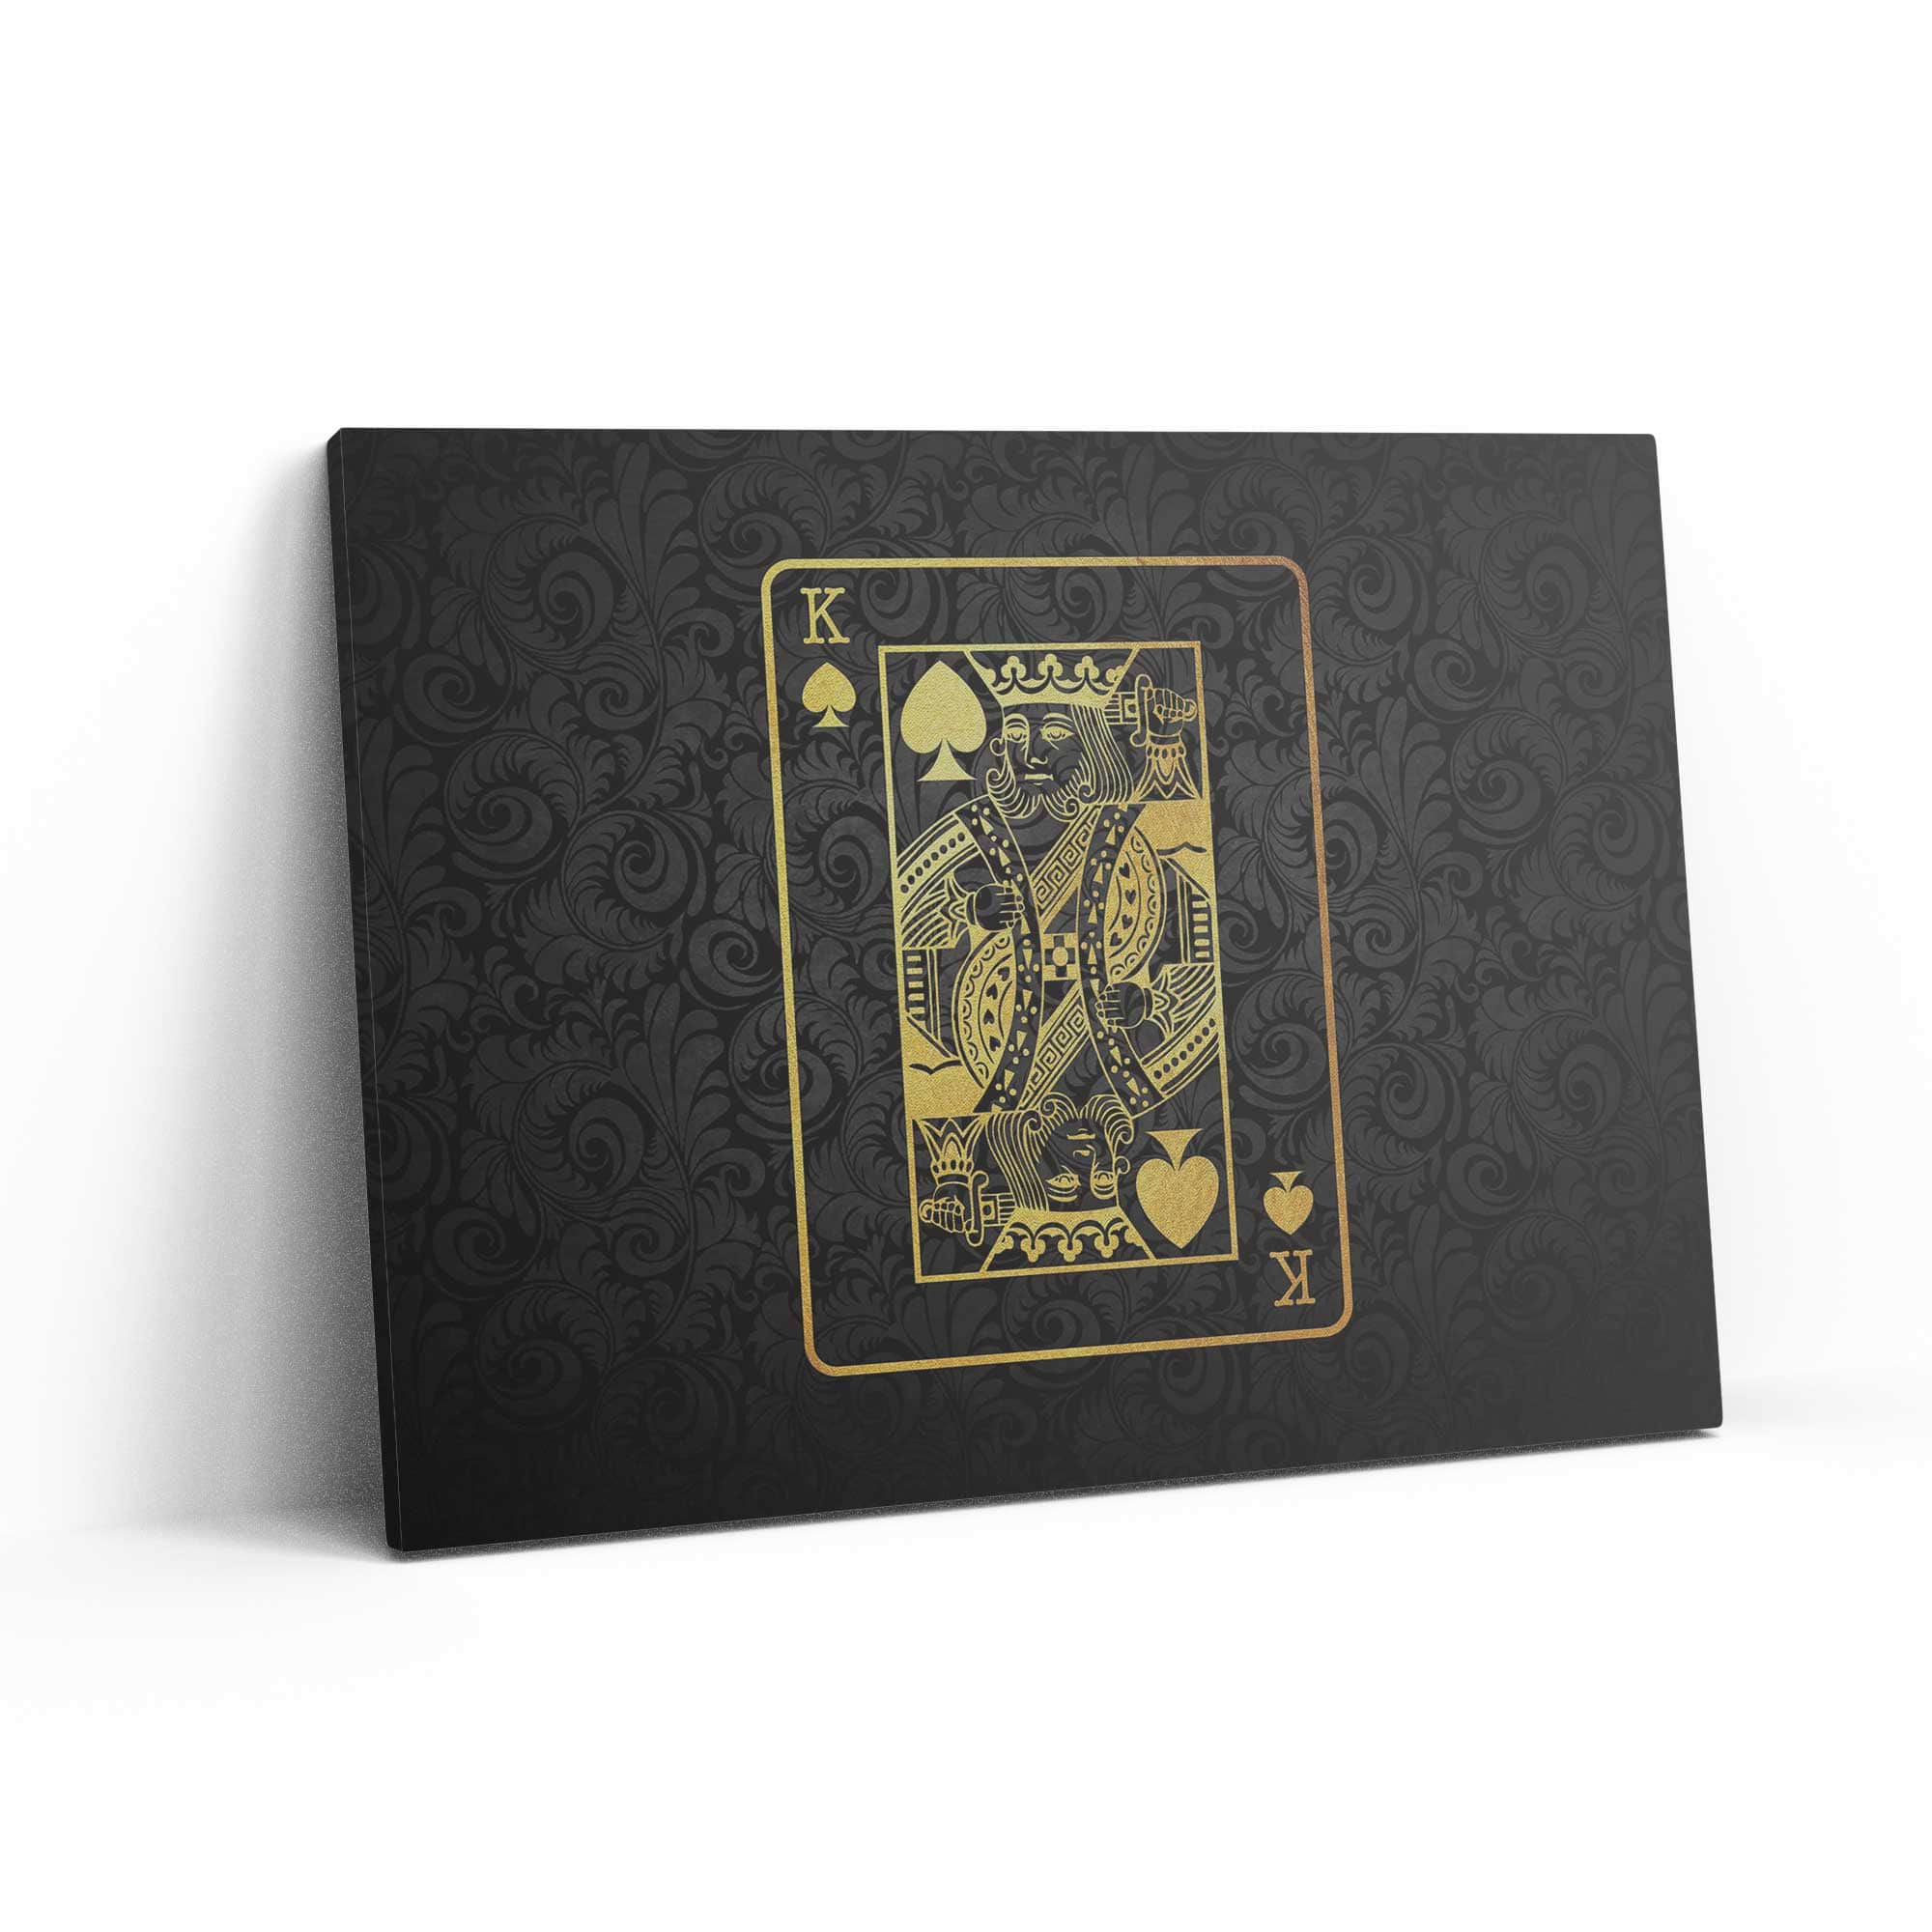 King of Spades in Gold over Black Canvas Print